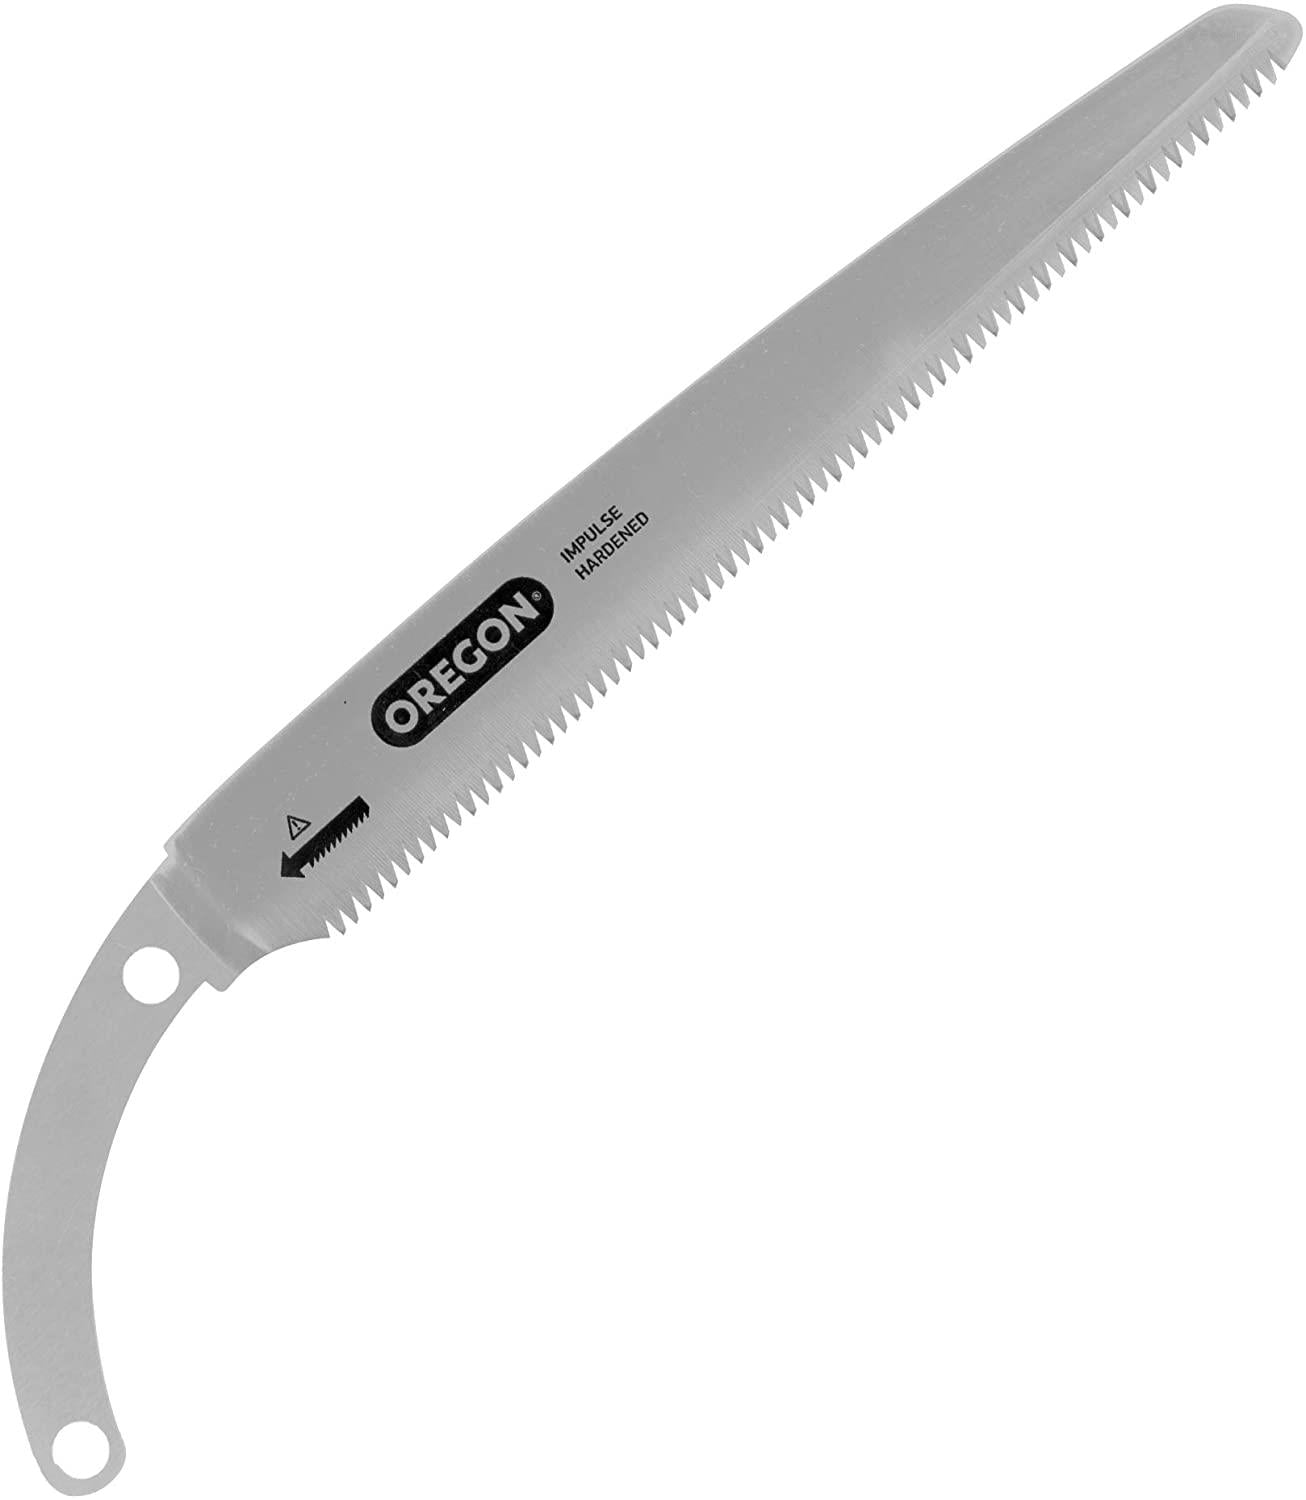 Oregon 600140 Straight Replacement Blade, 12"